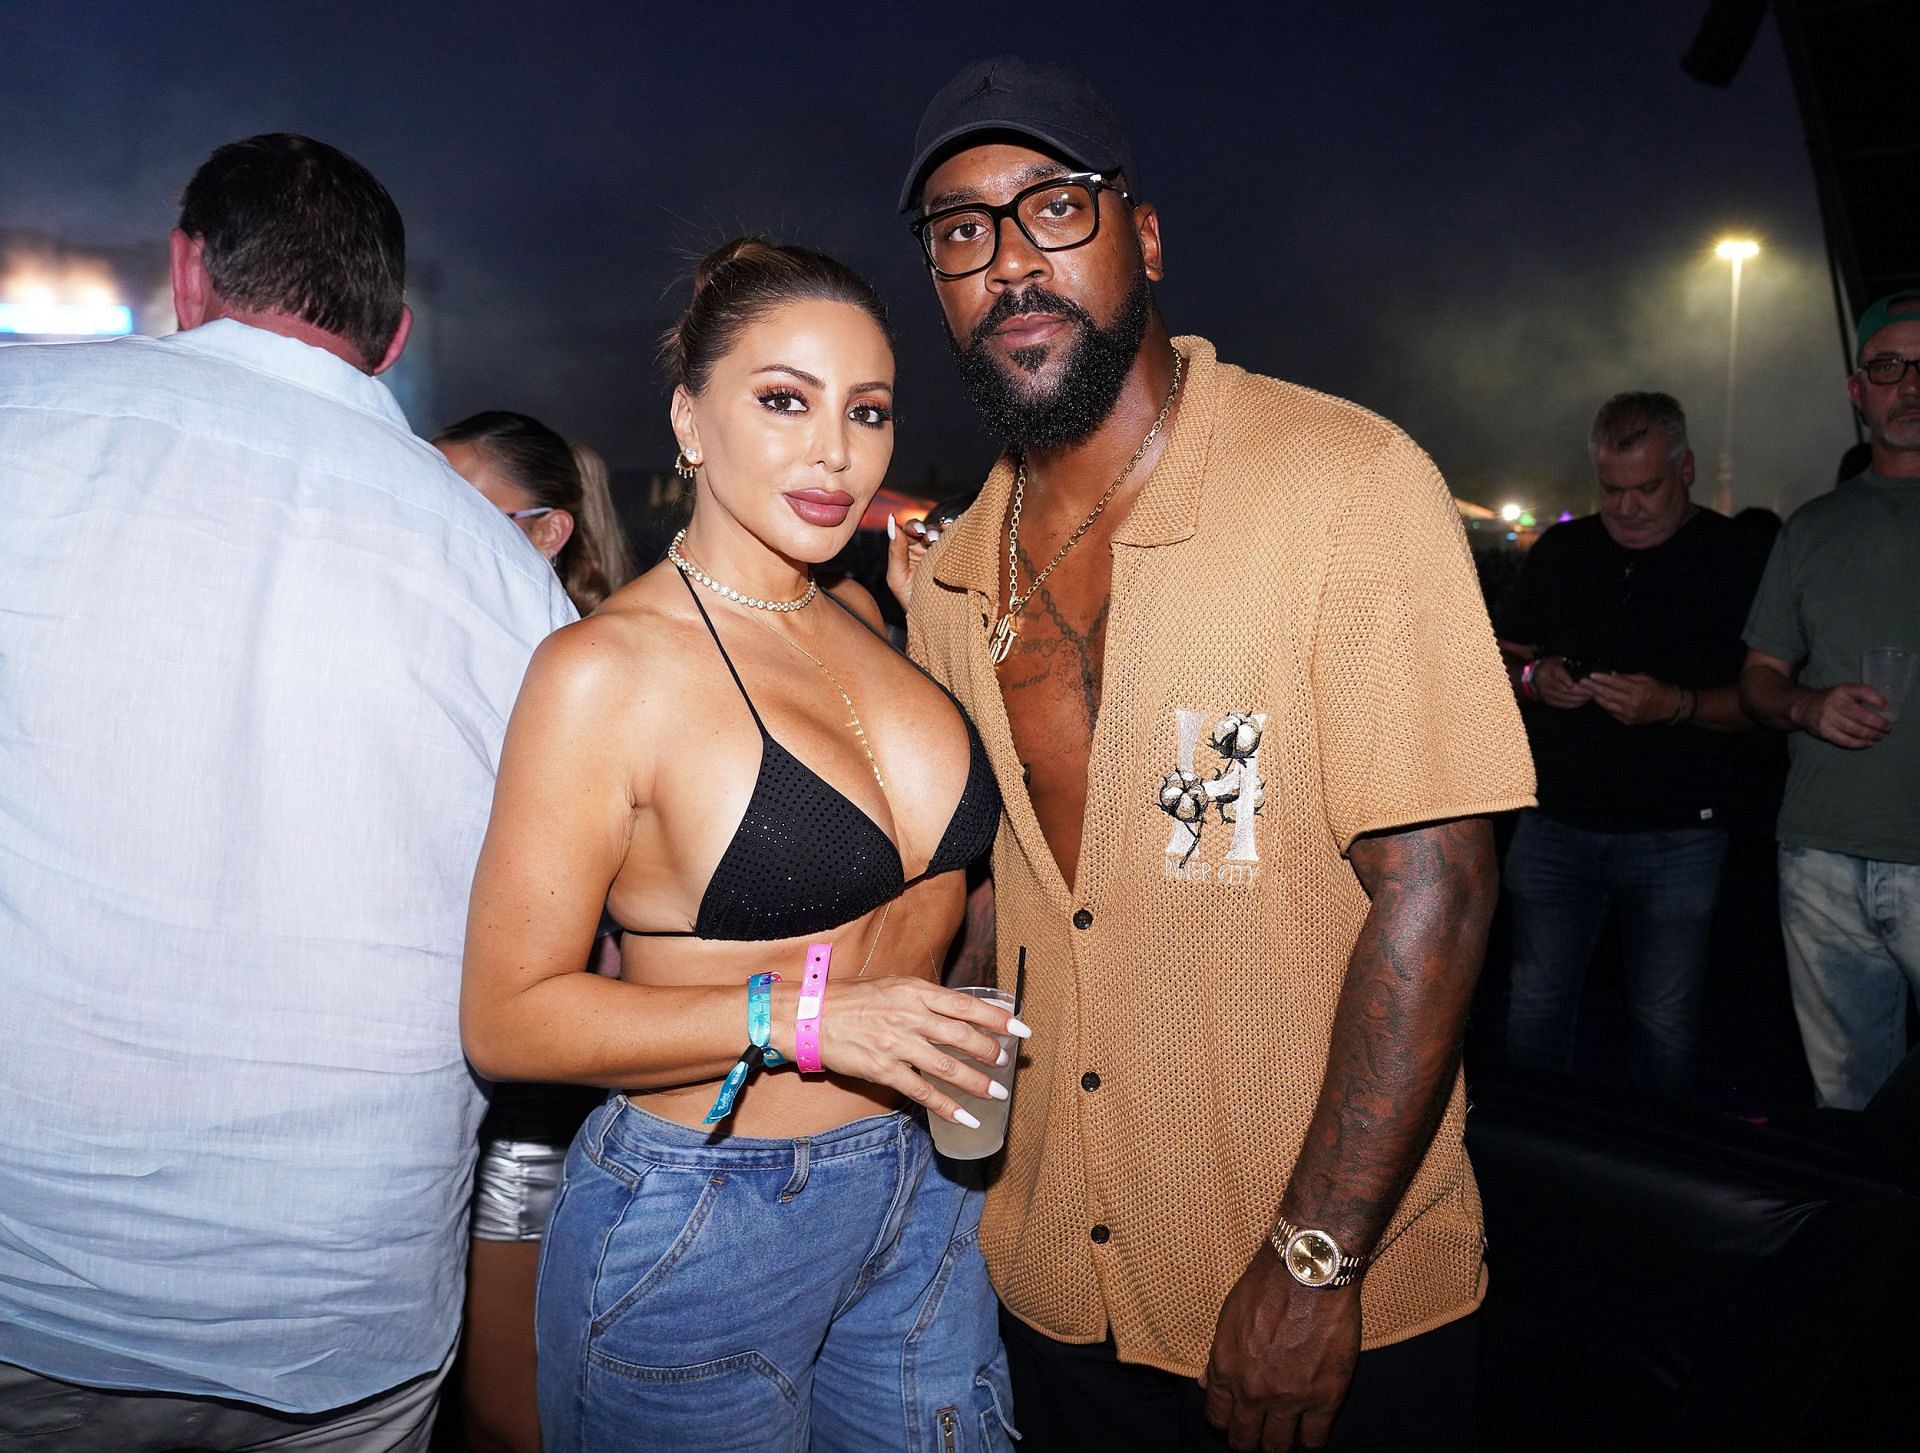 It's way more than 4" - Marcus Jordan opens up on sexual encounters with Larsa  Pippen bragging about their s*x life